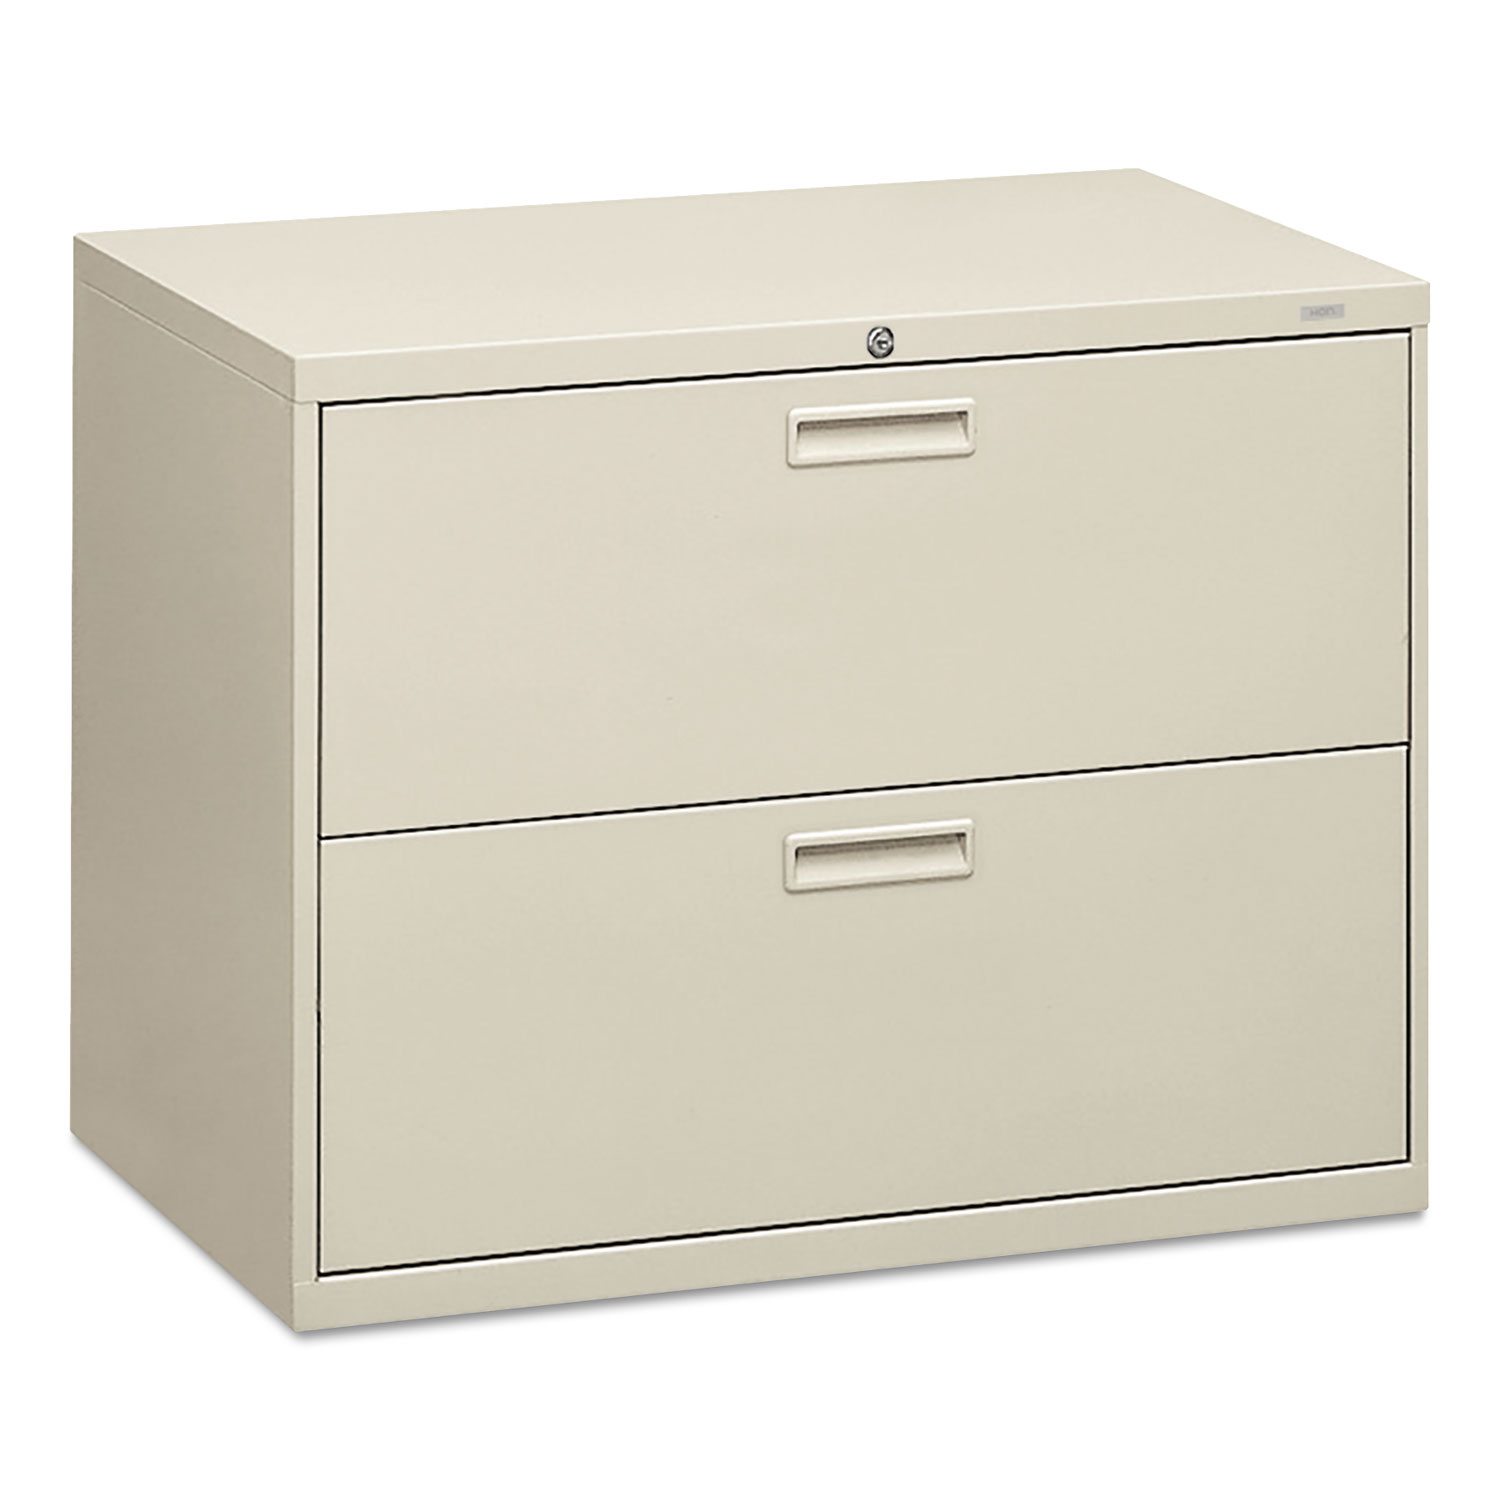 500 Series Two-Drawer Lateral File, 36w x 18d x 28h, Light Gray